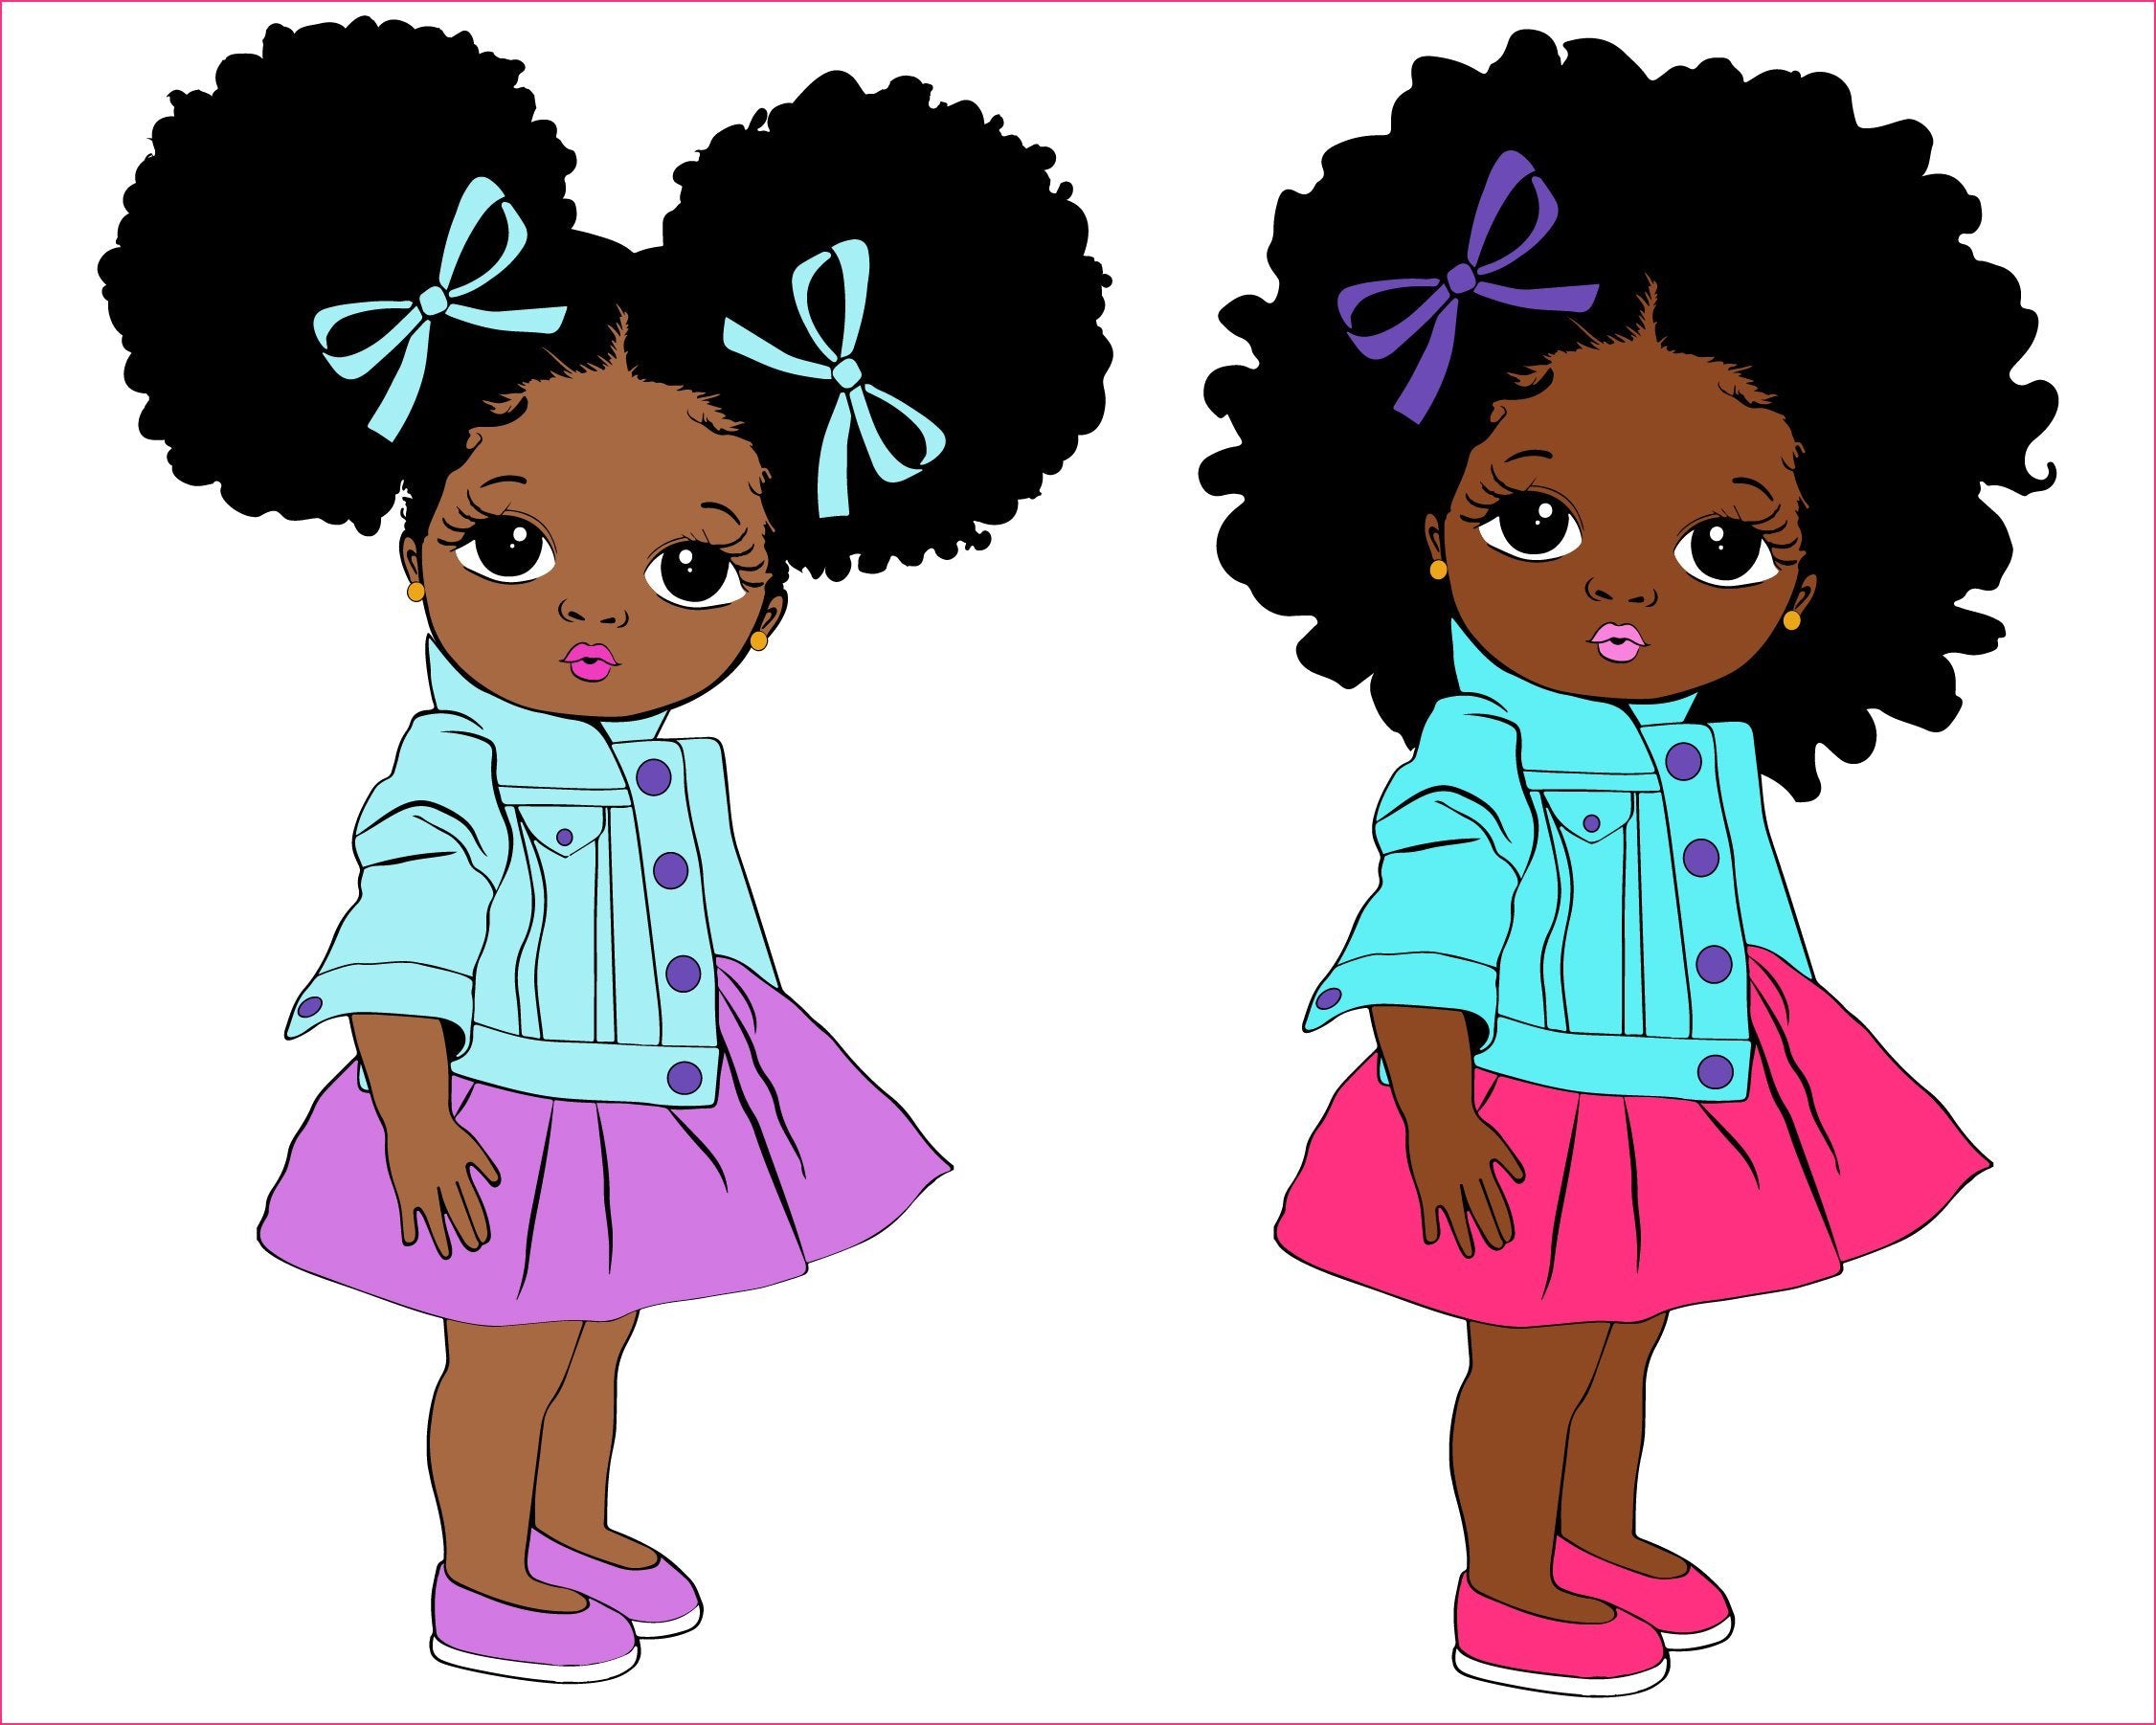 Download Peekaboo Girl With Puff Afro Ponytails Svg Cute Black African American Kids Svg Dxf Eps Png Cut File For Cricut African American Clipart So Fontsy